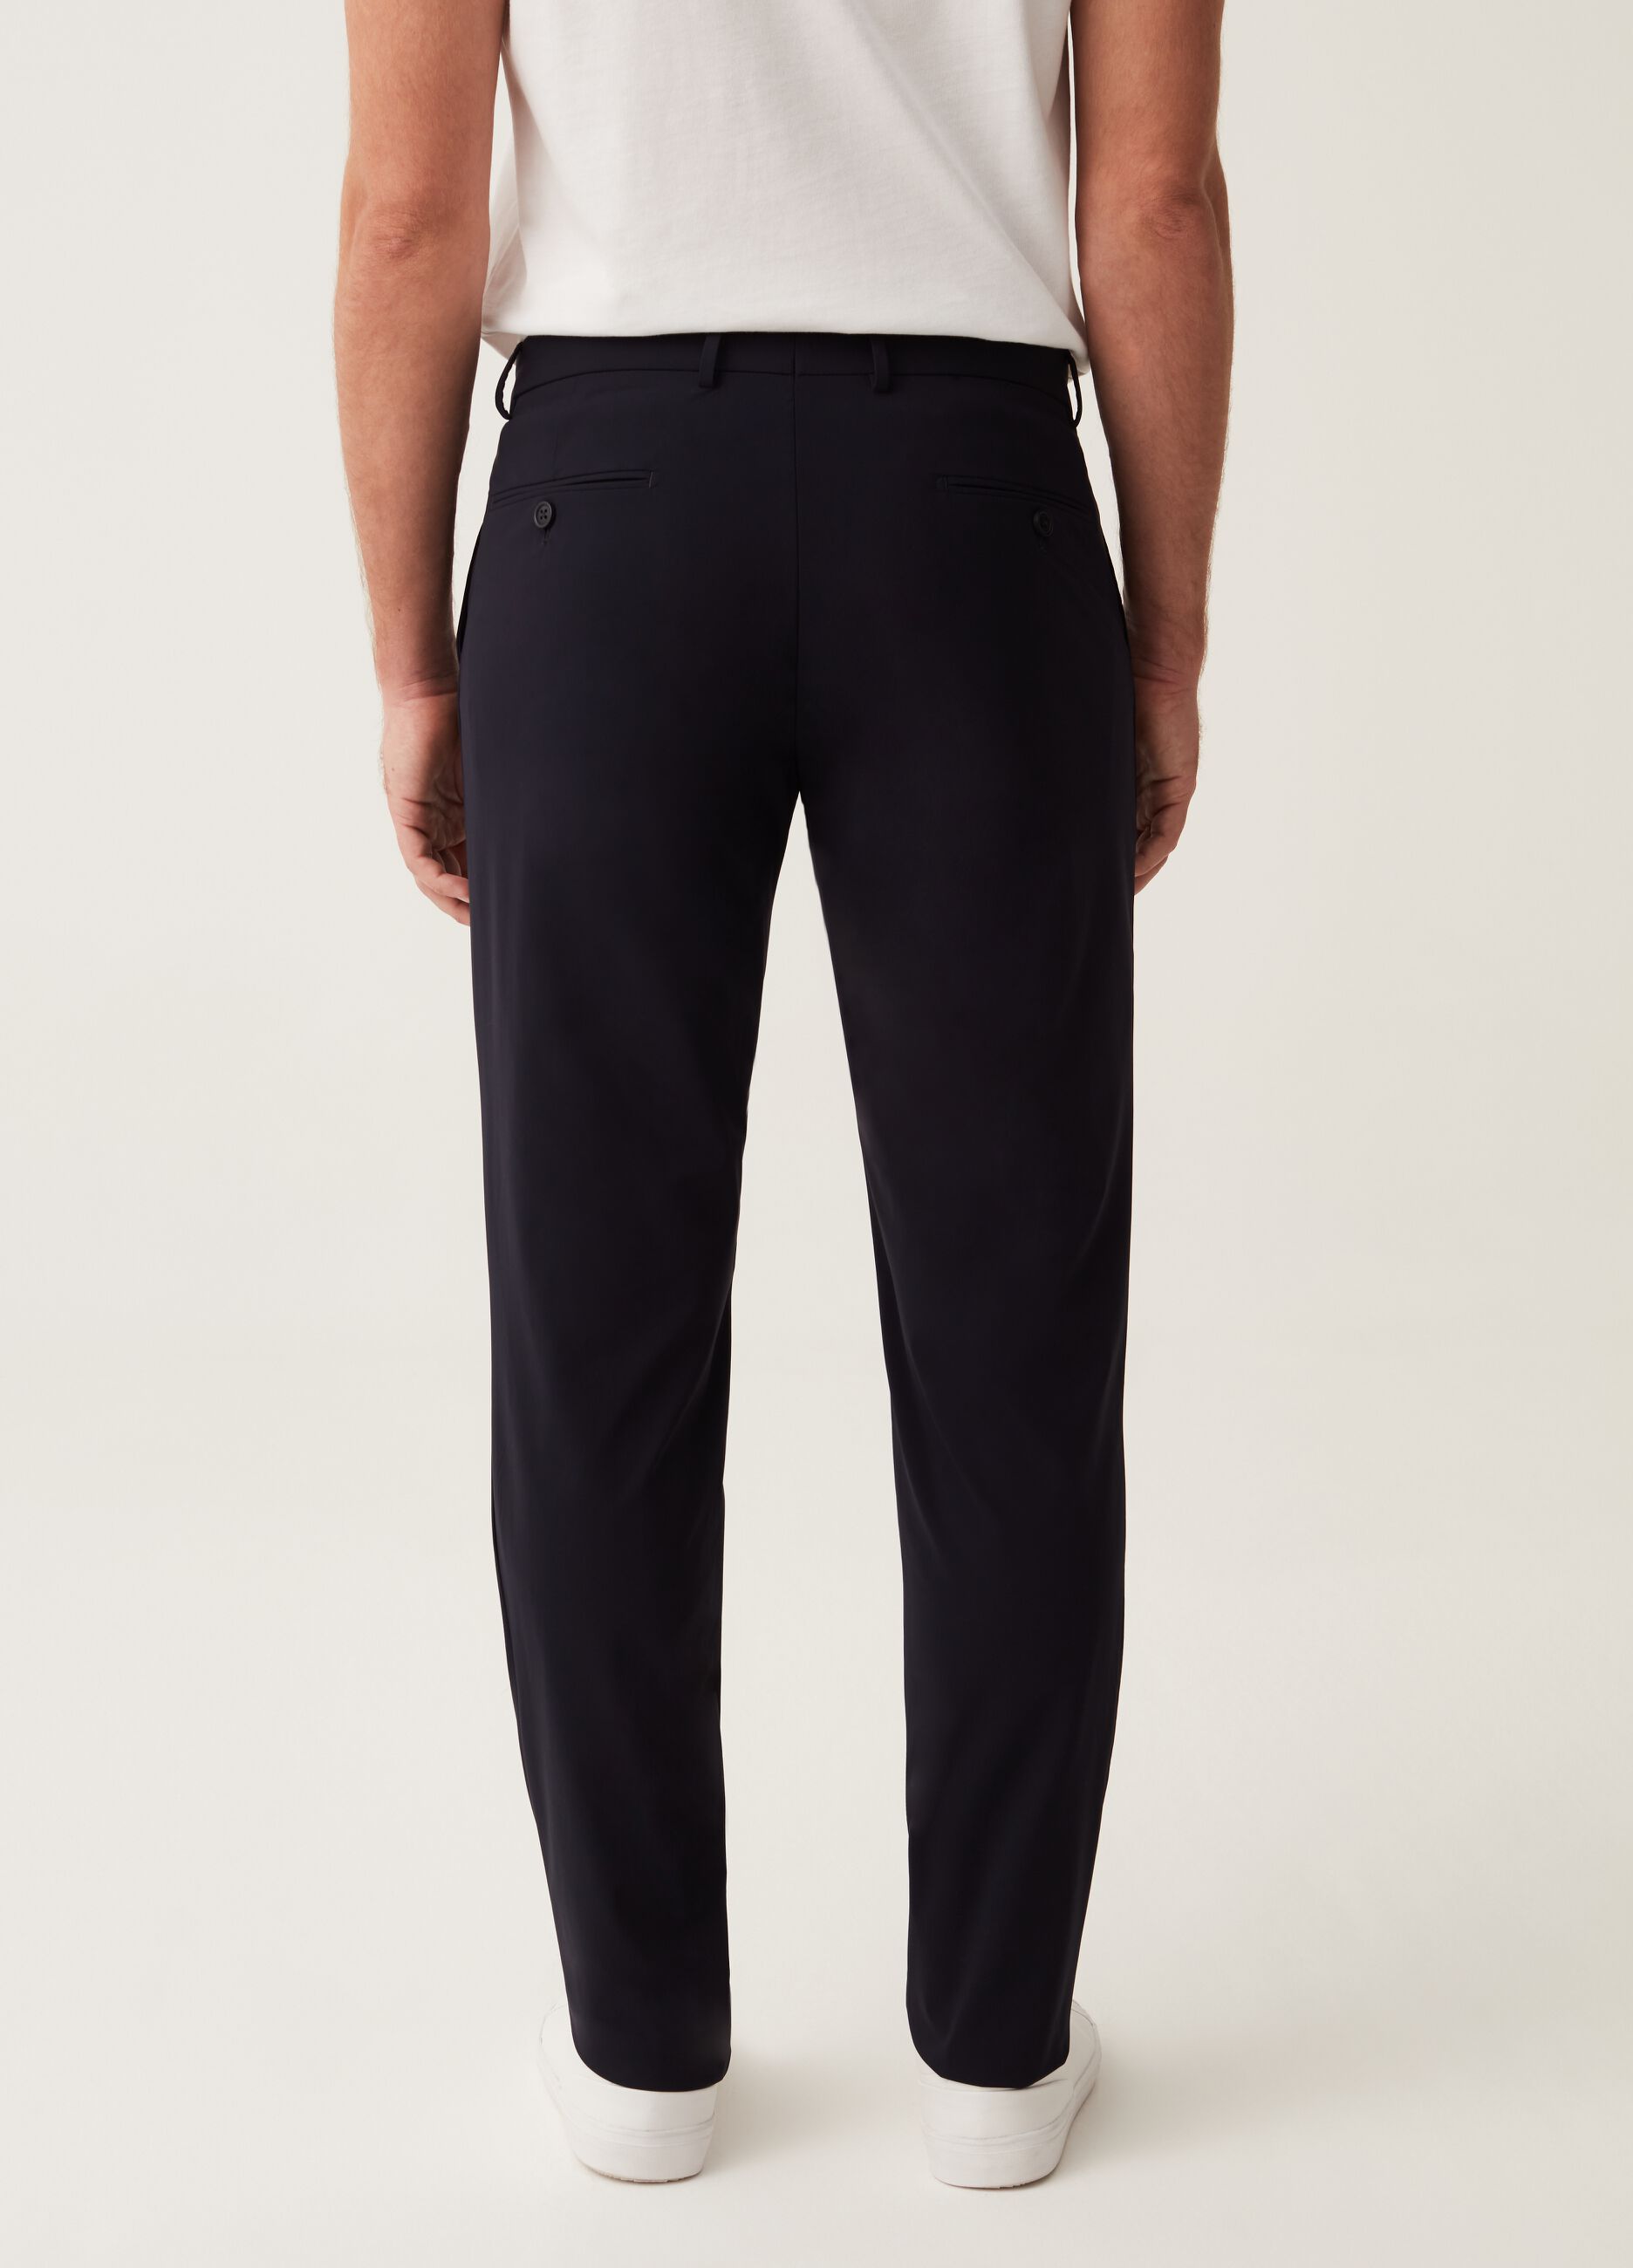 Slim-fit trousers in navy blue technical fabric